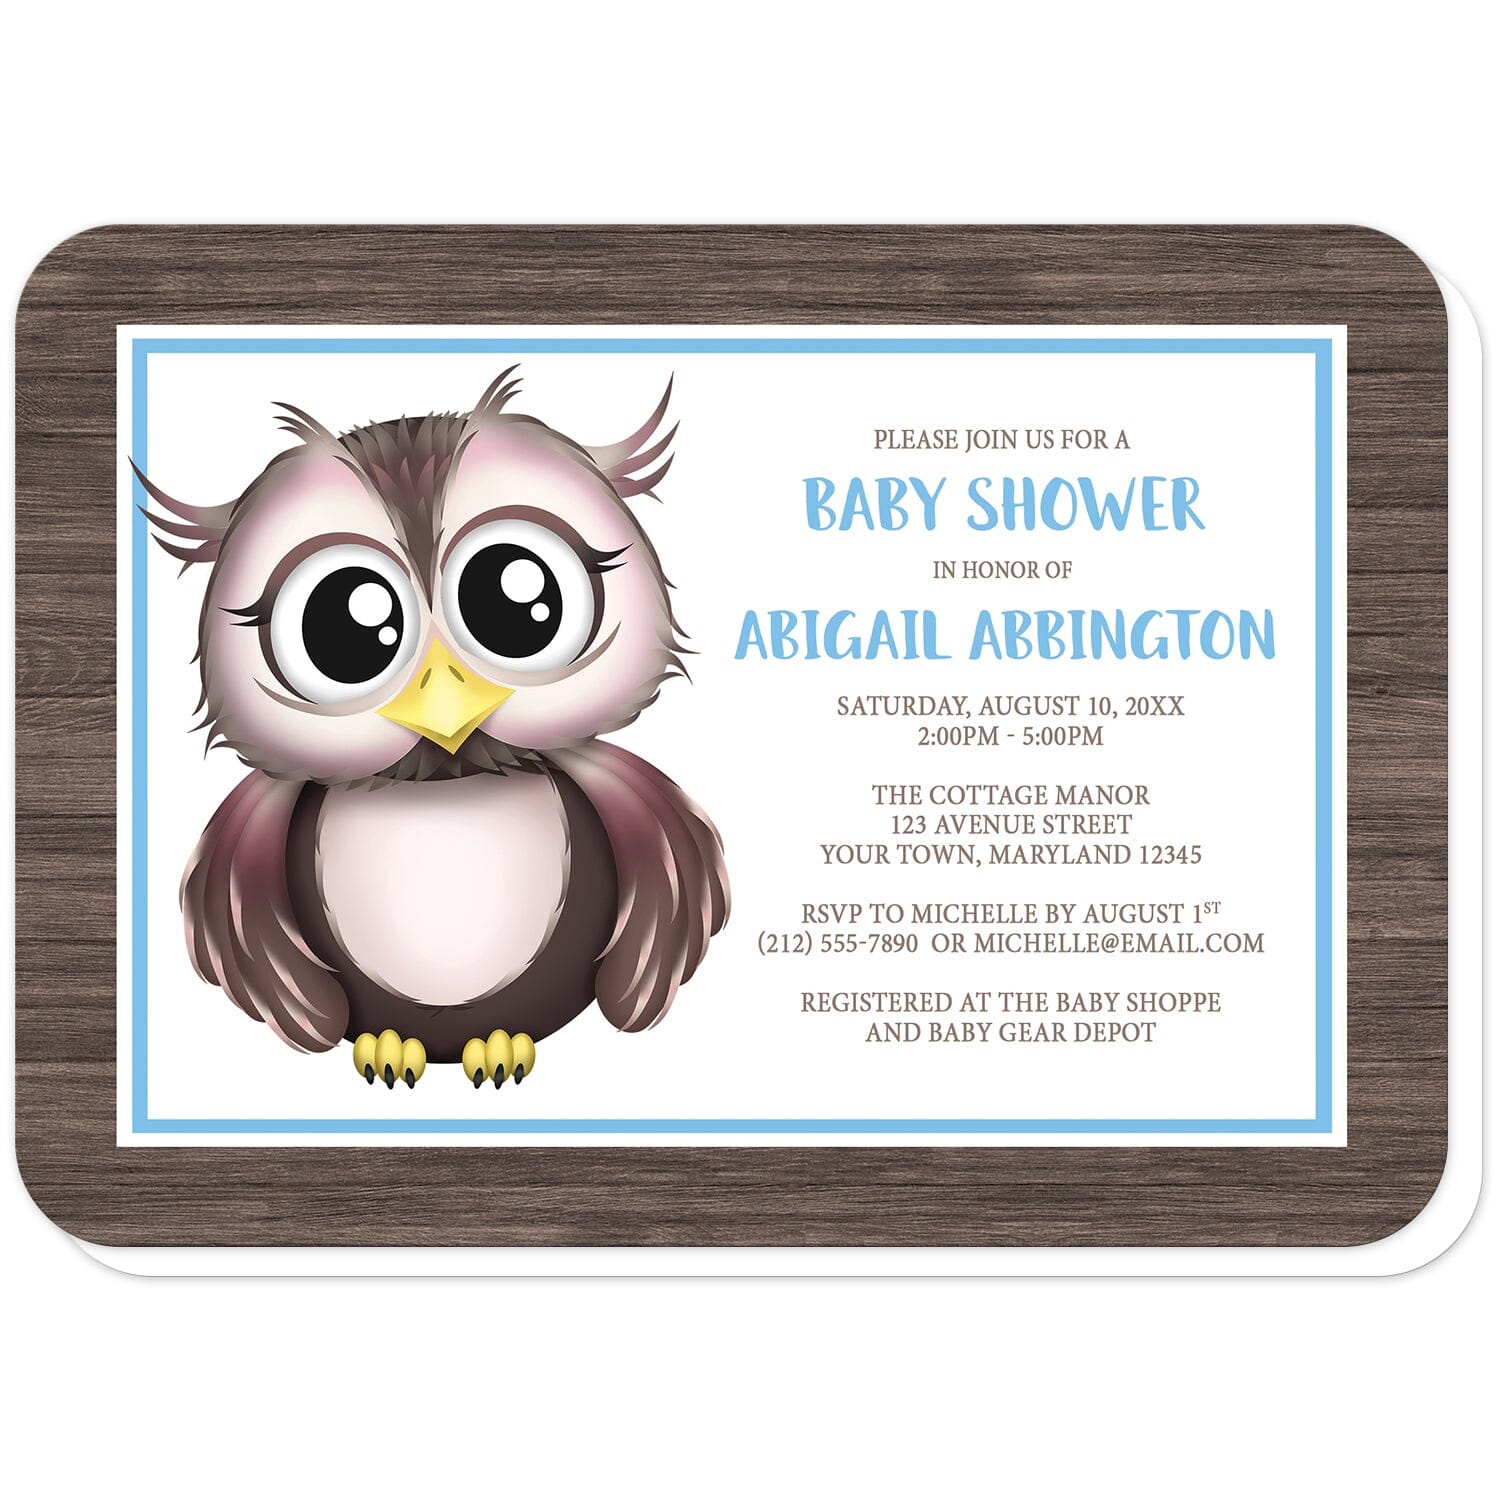 Adorable Owl Blue and Brown Baby Shower Invitations (with rounded corners) at Artistically Invited. Adorable owl blue and brown baby shower invitations with an illustration of a cute brown owl and a rustic brown wood frame background design. This cute little owl stands inside a white rectangle outlined in blue and white. The personalized information you provide for your baby shower celebration will be printed in blue and brown over white to the right of the cute owl.